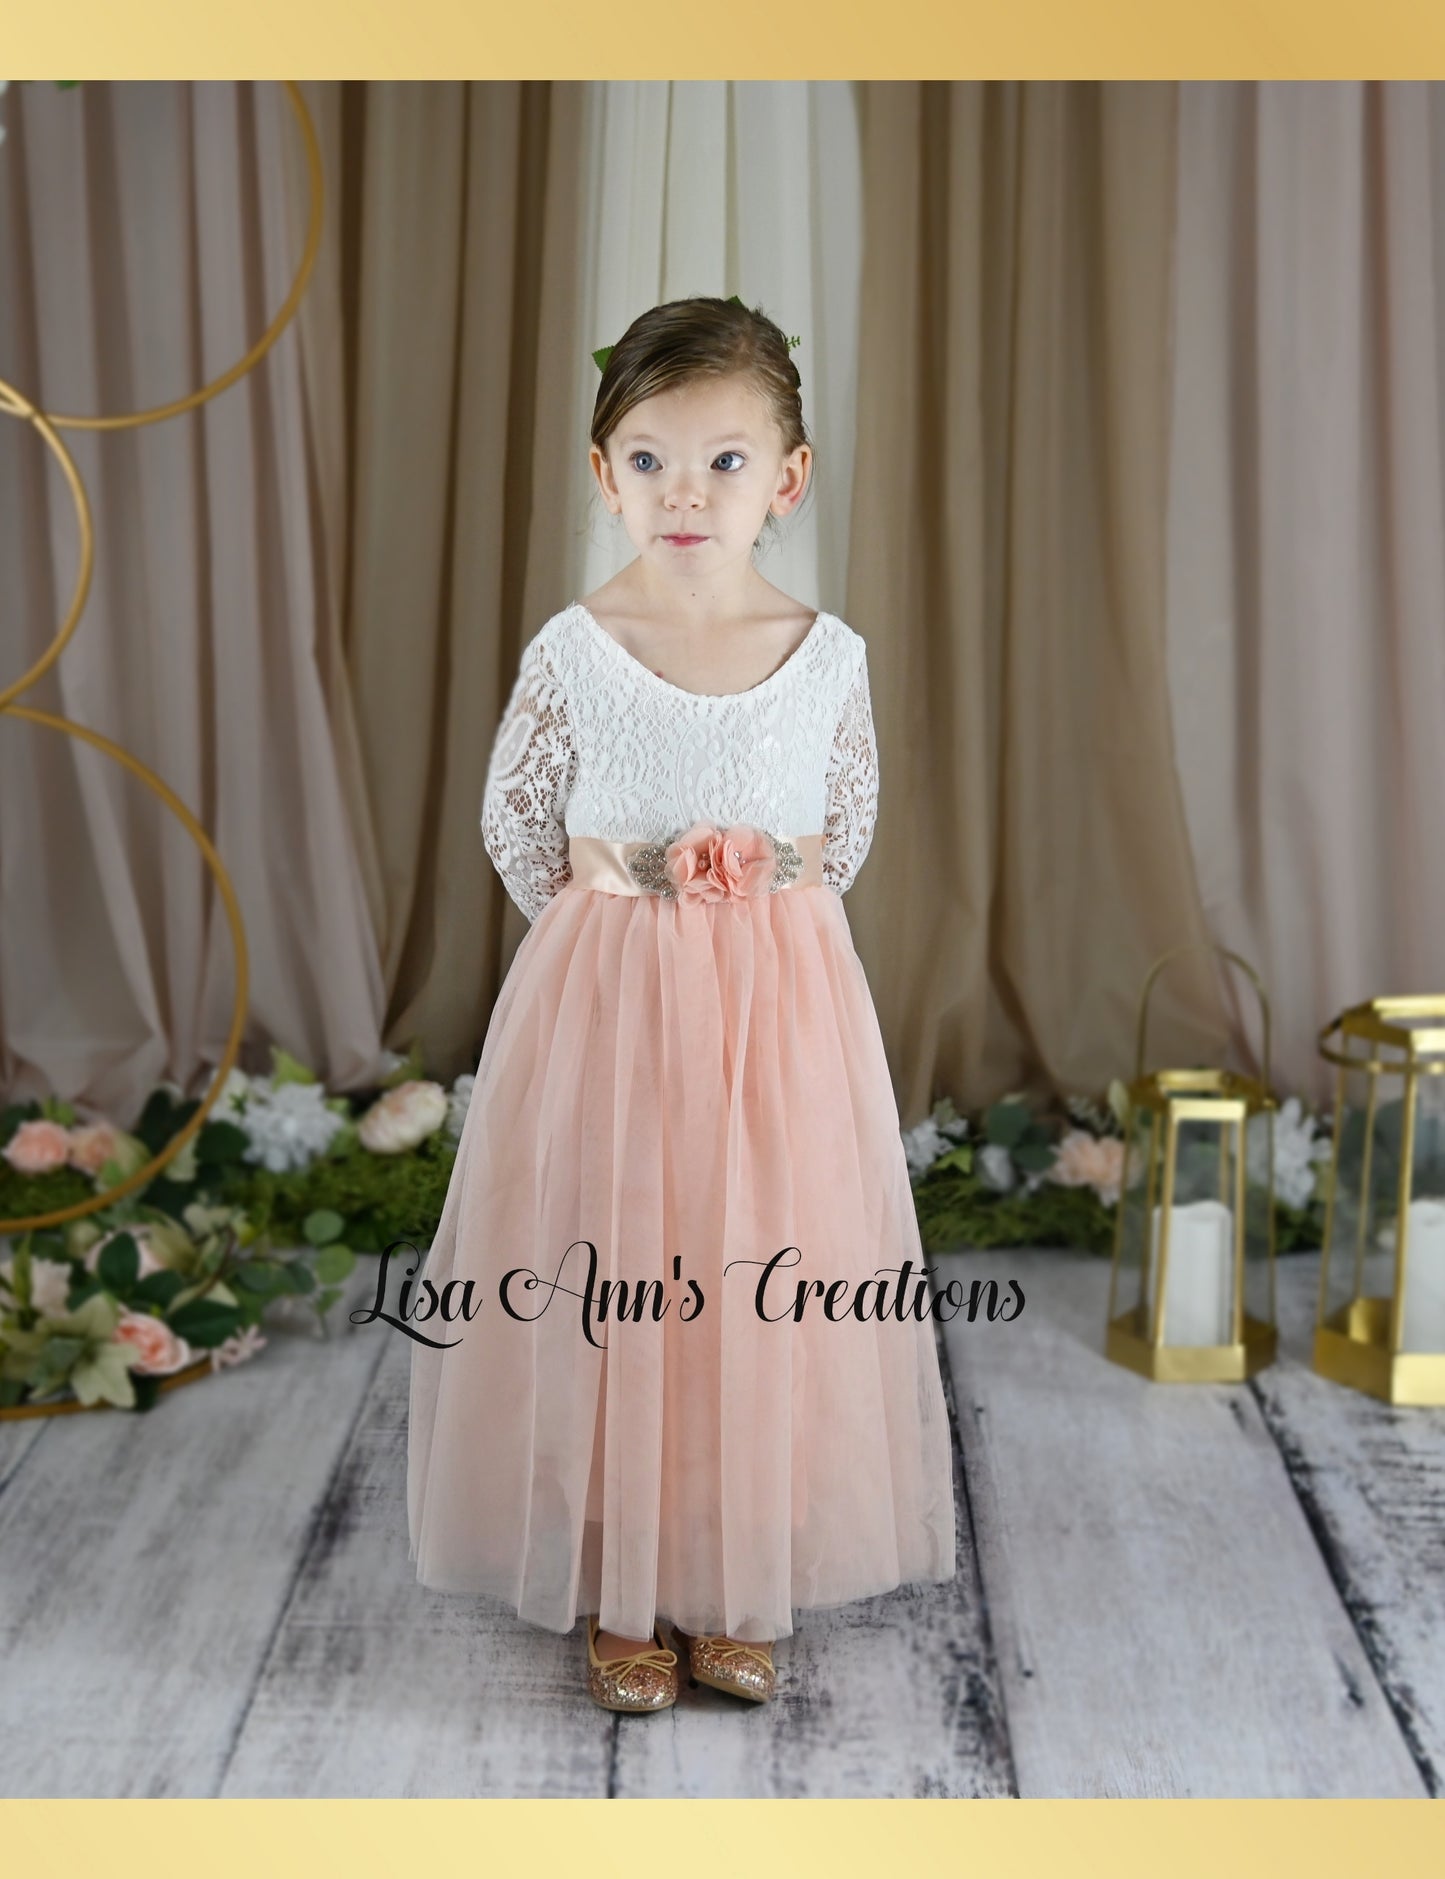 Boho Flower girl dress in light peach and white lace